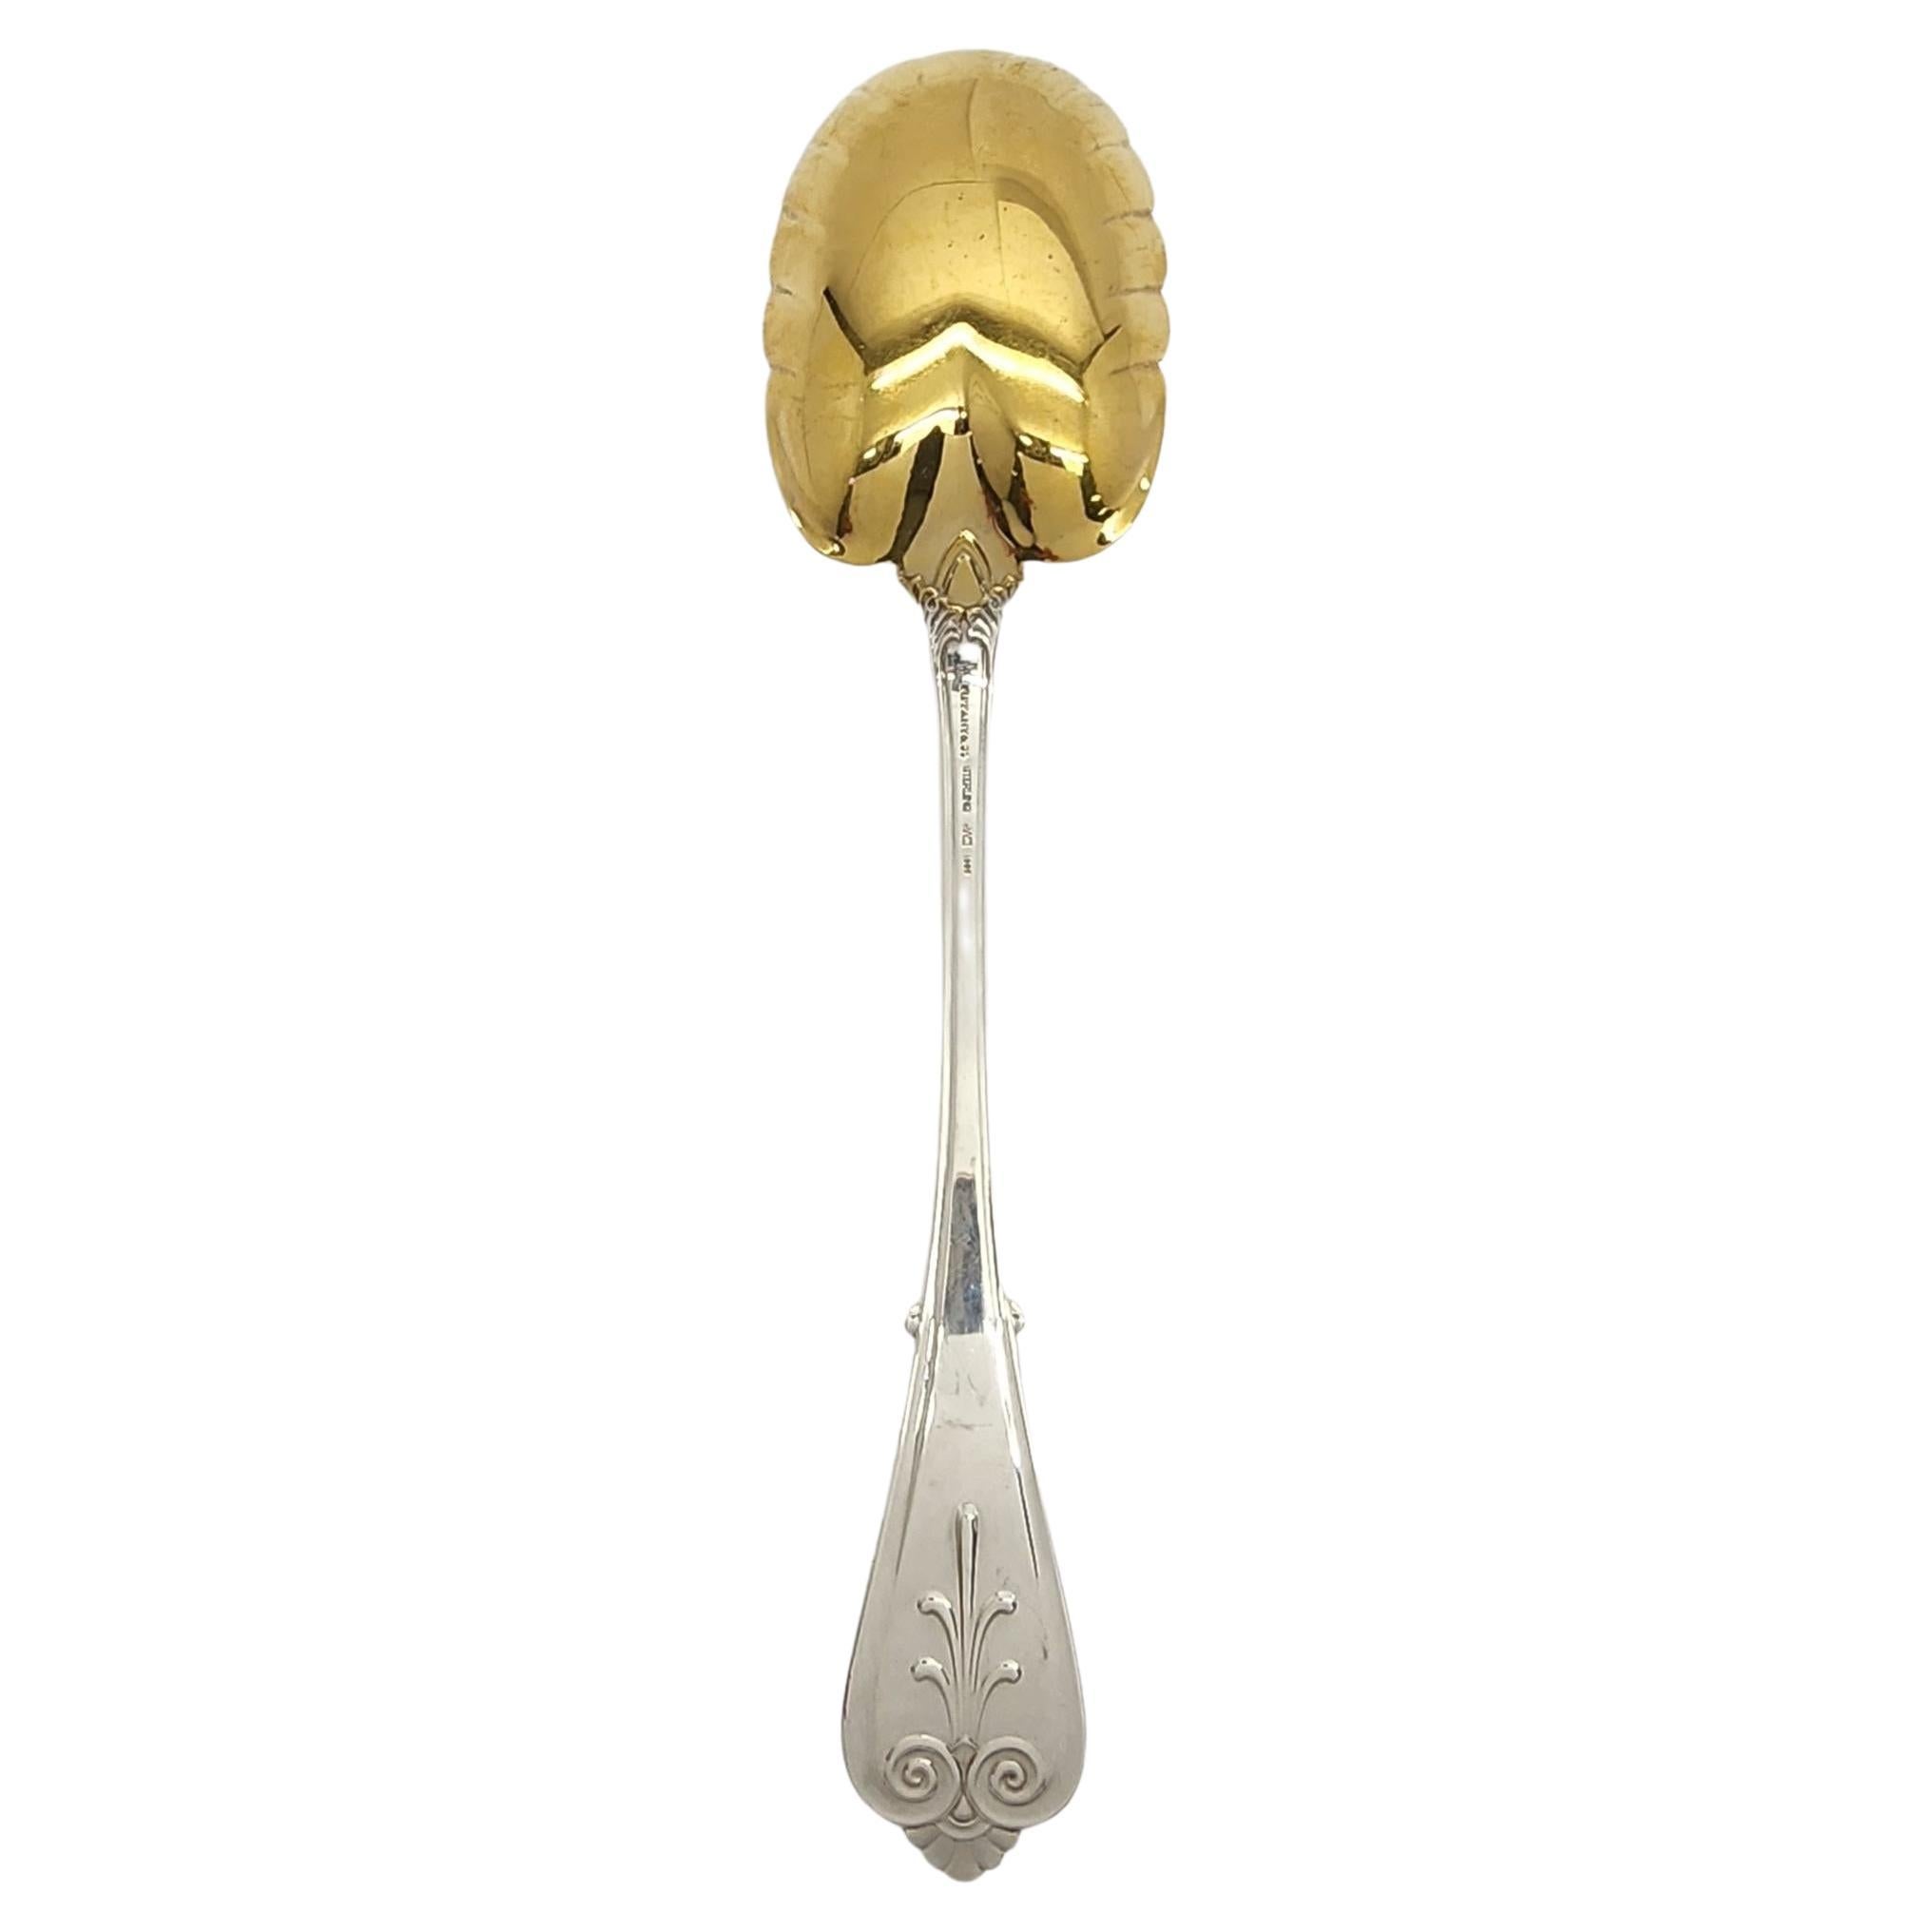 Tiffany & Co sterling silver gold wash bowl berry serving spoon in the Beekman 1869 pattern by Tiffany & Co.

Monogram appears to be EPM

Beautifully simple scroll design was designed in 1869 by Edward Moore. Features a gold washed leaf shape bowl.